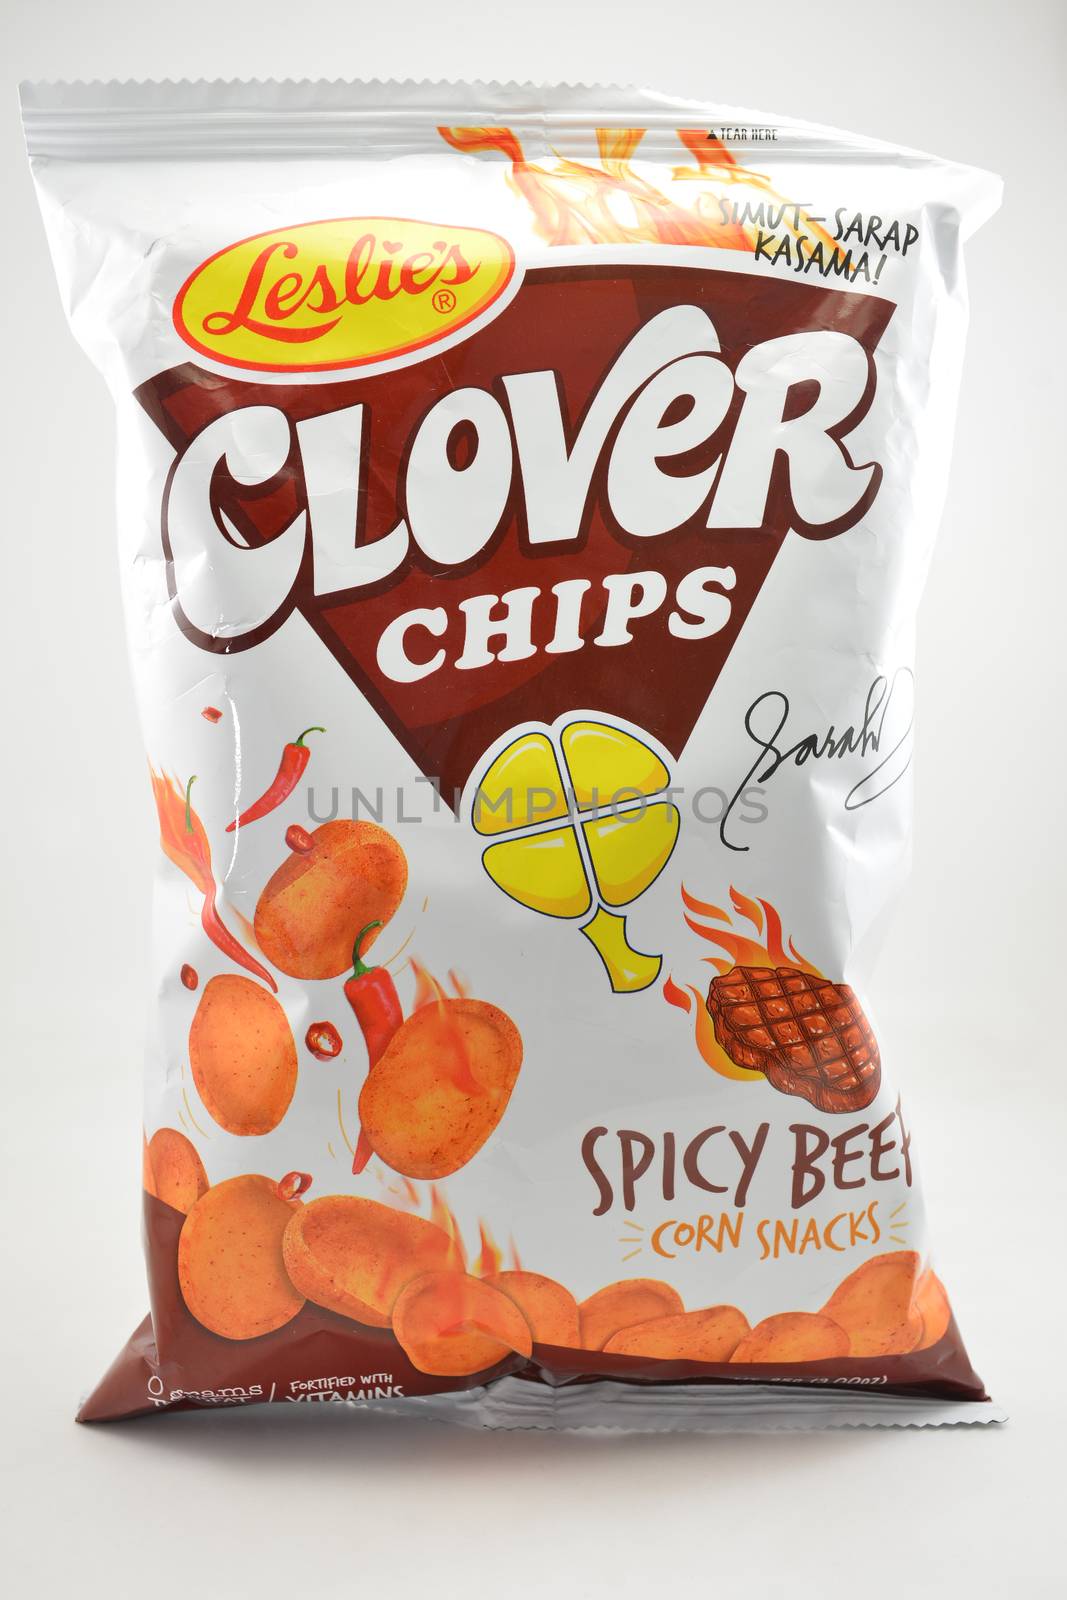 Clover chips spicy beef corn snacks in Manila, Philippines by imwaltersy